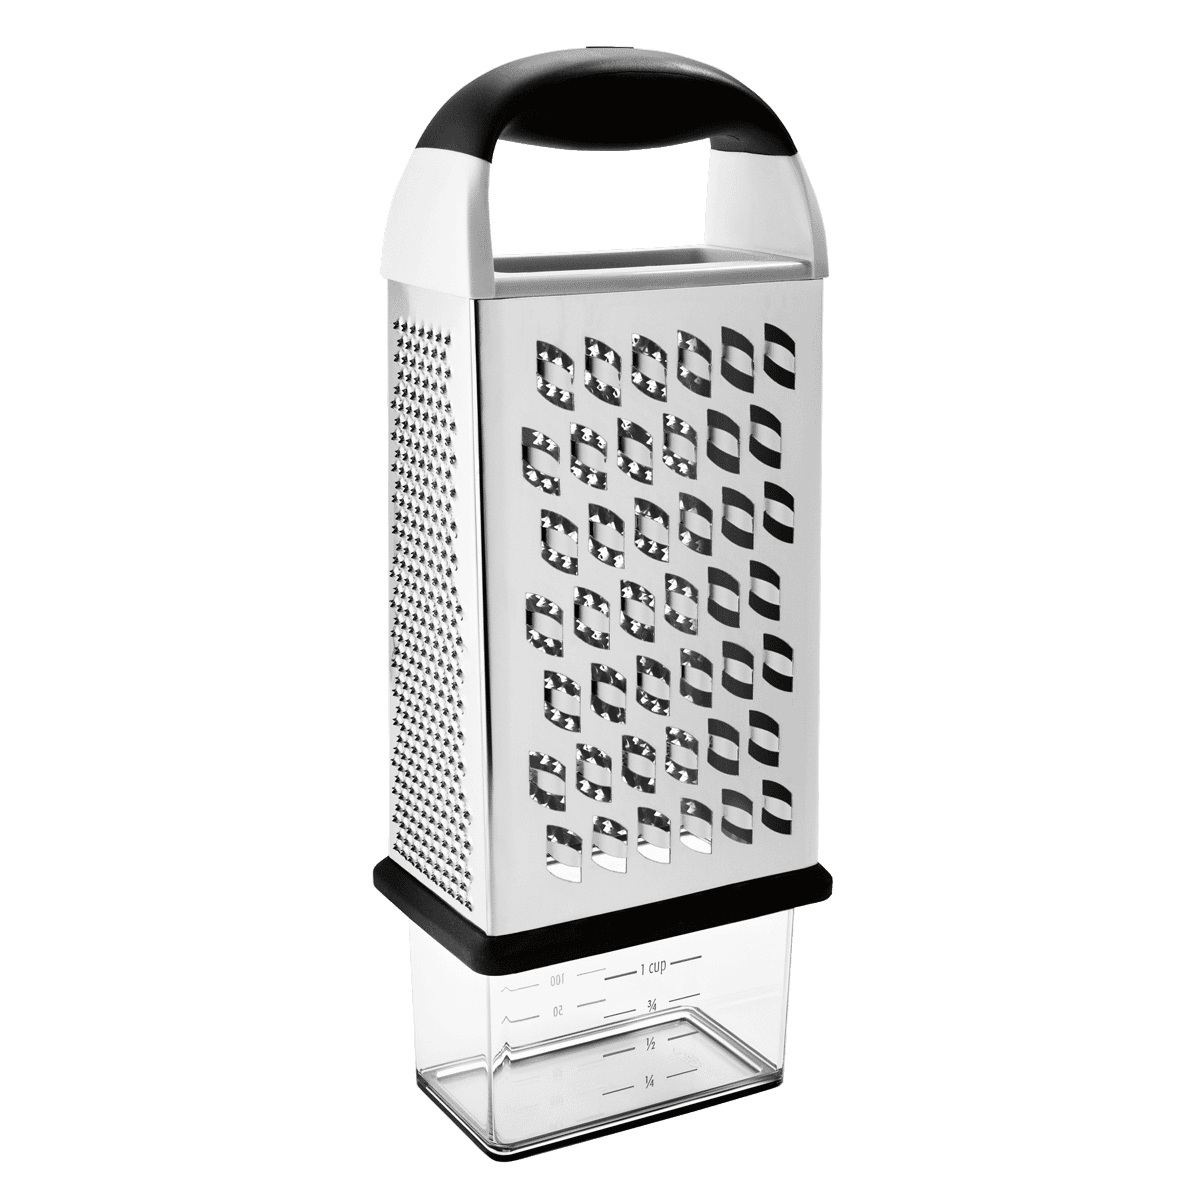 Cheese Graters for sale in Melbourne, Victoria, Australia, Facebook  Marketplace